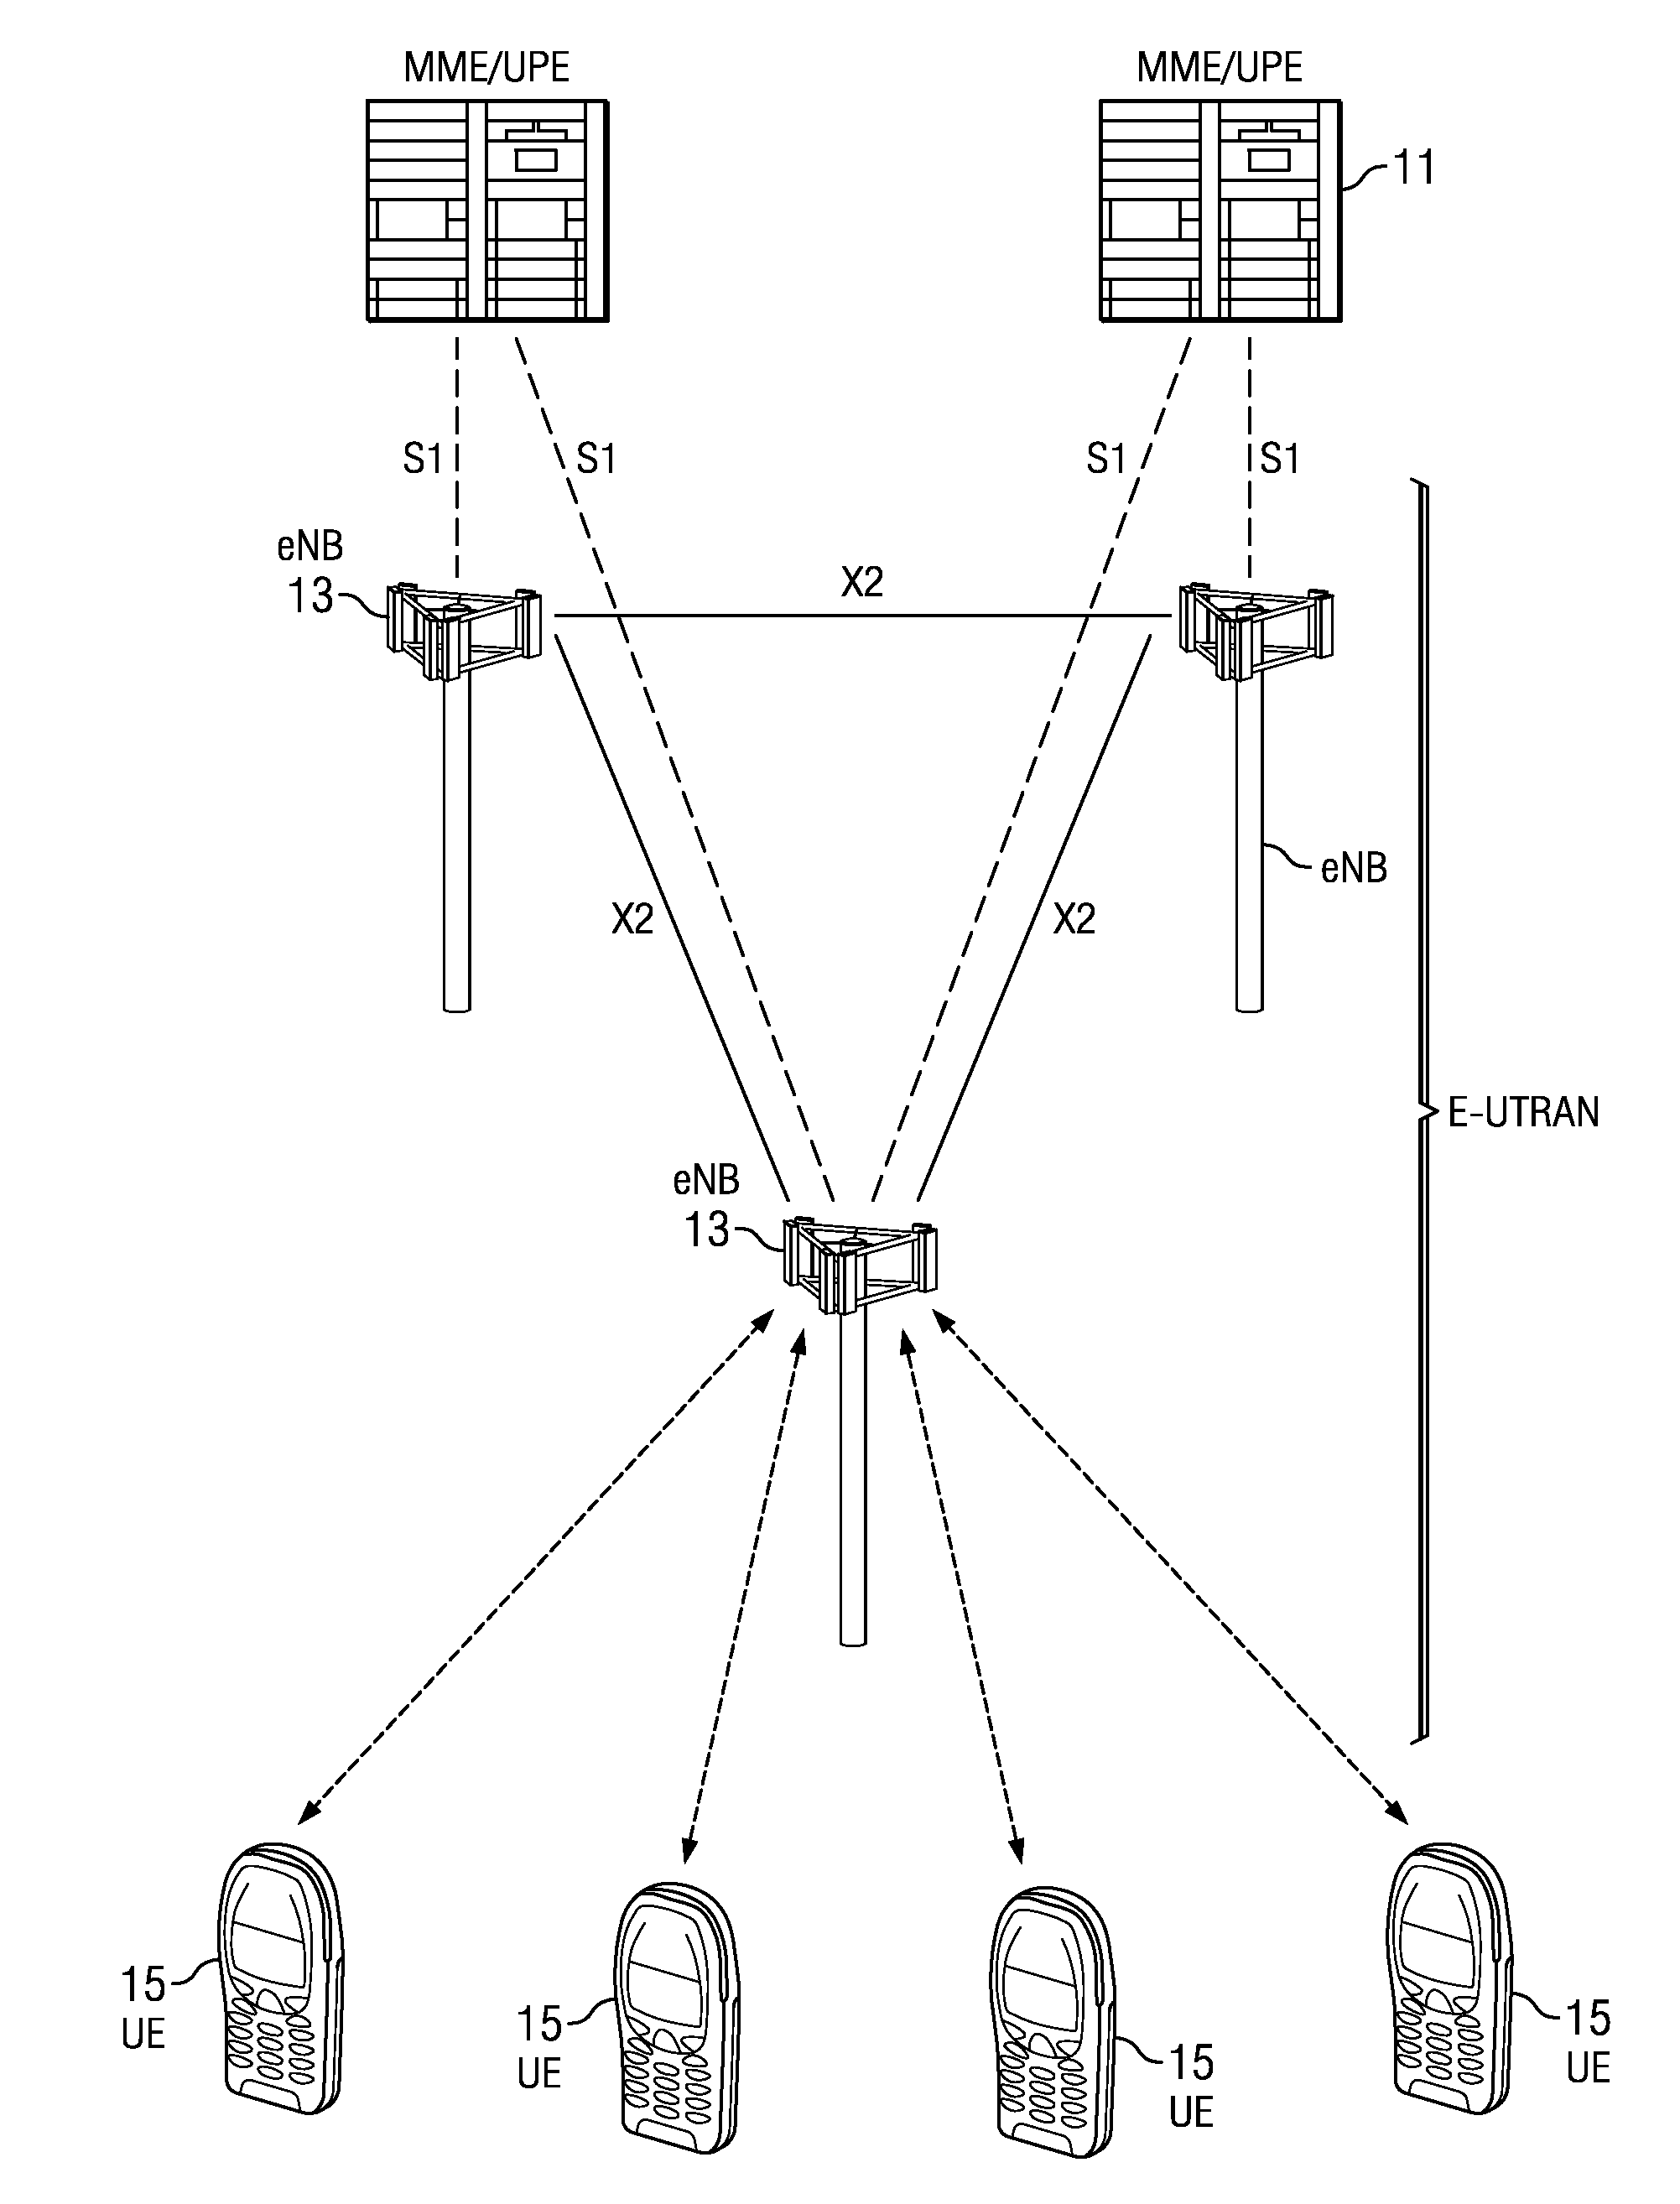 Methods and Apparatus for Communications Terminal Enabling Self Optimizing Networks in Air Interface Communications Systems